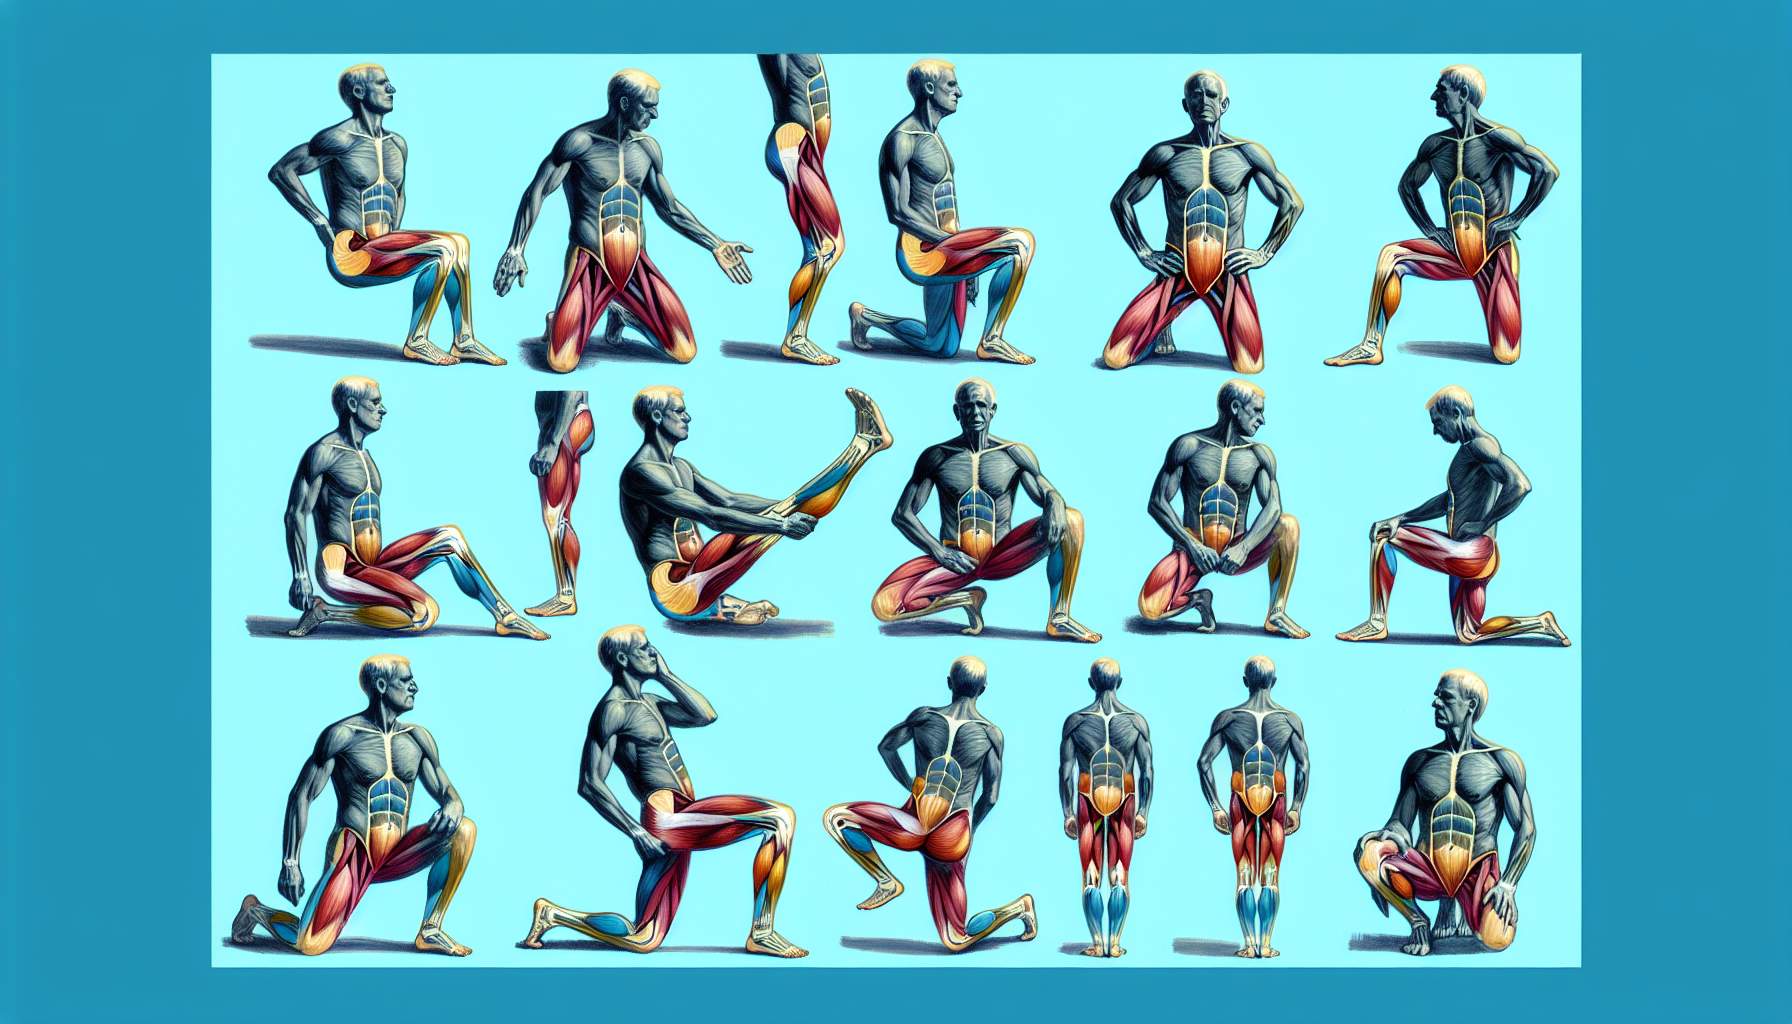 Yoga for Prostate Enlargement (BPH): Poses to Help